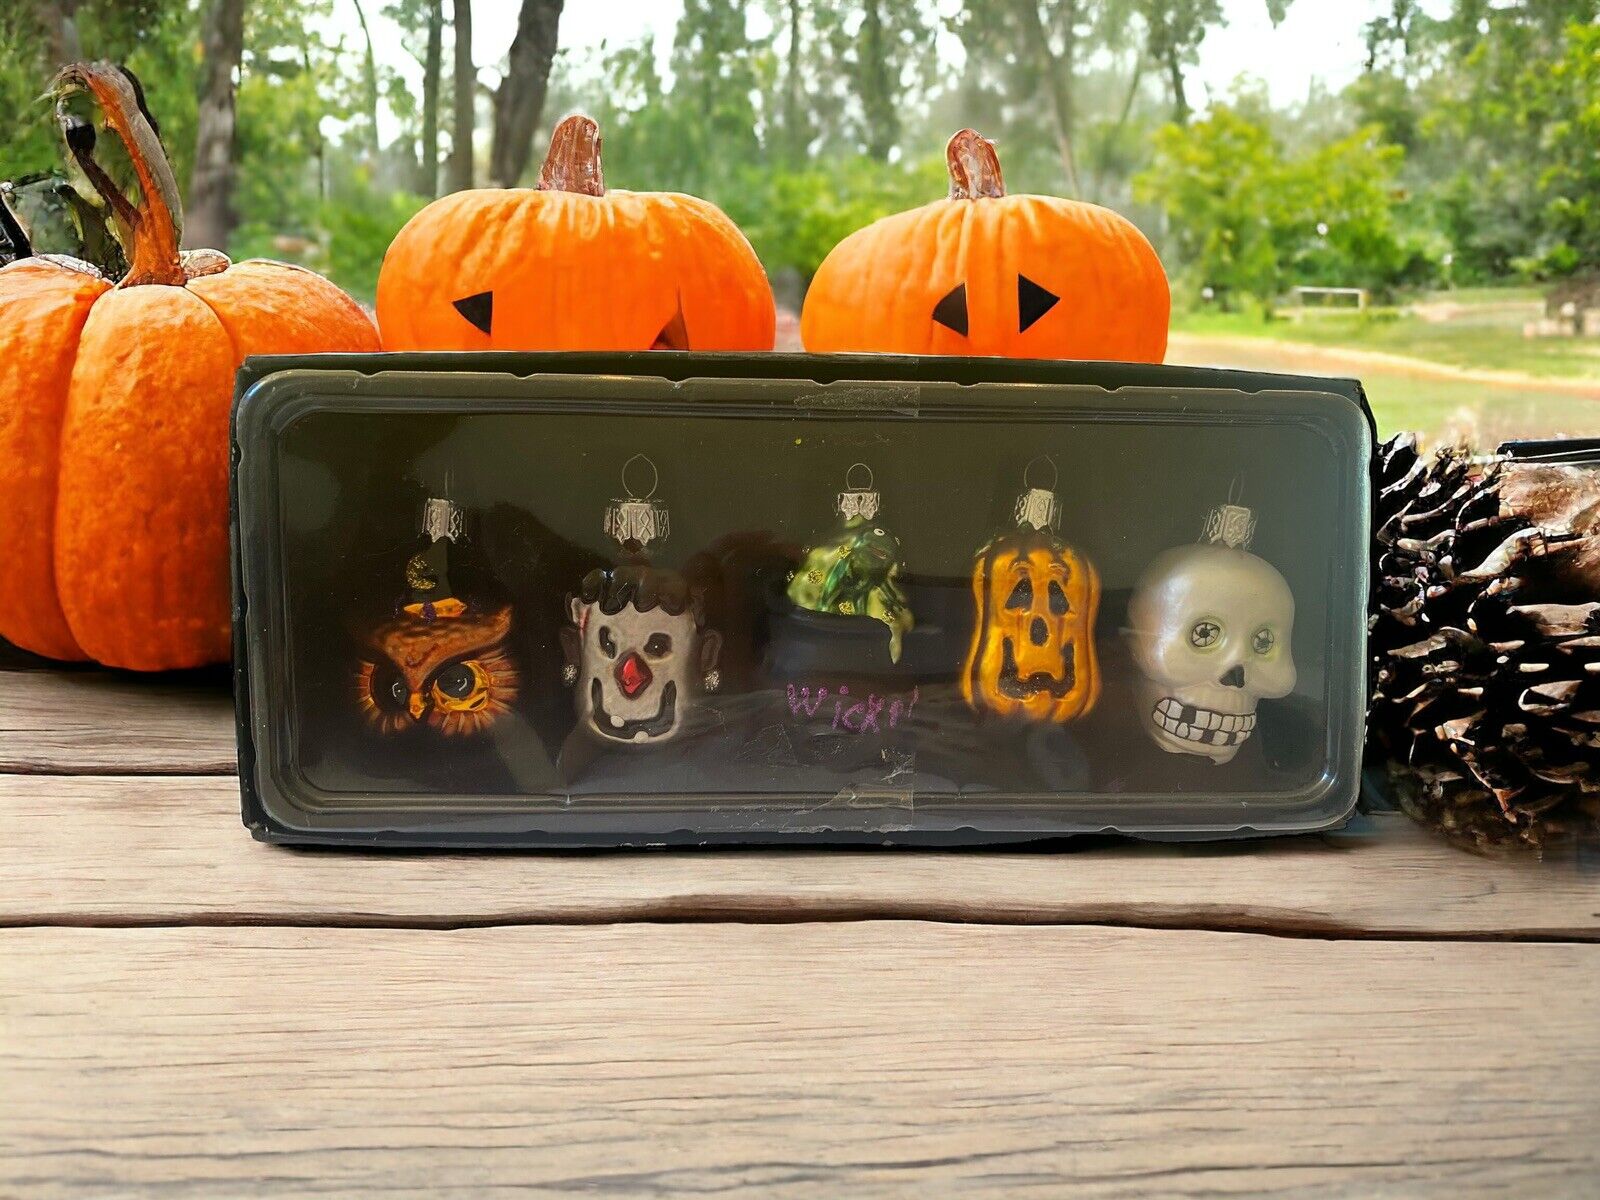 Pier 1 Imports Halloween Set Of 5 Glass Ornaments Owl Pumpkin Skeleton Witches..